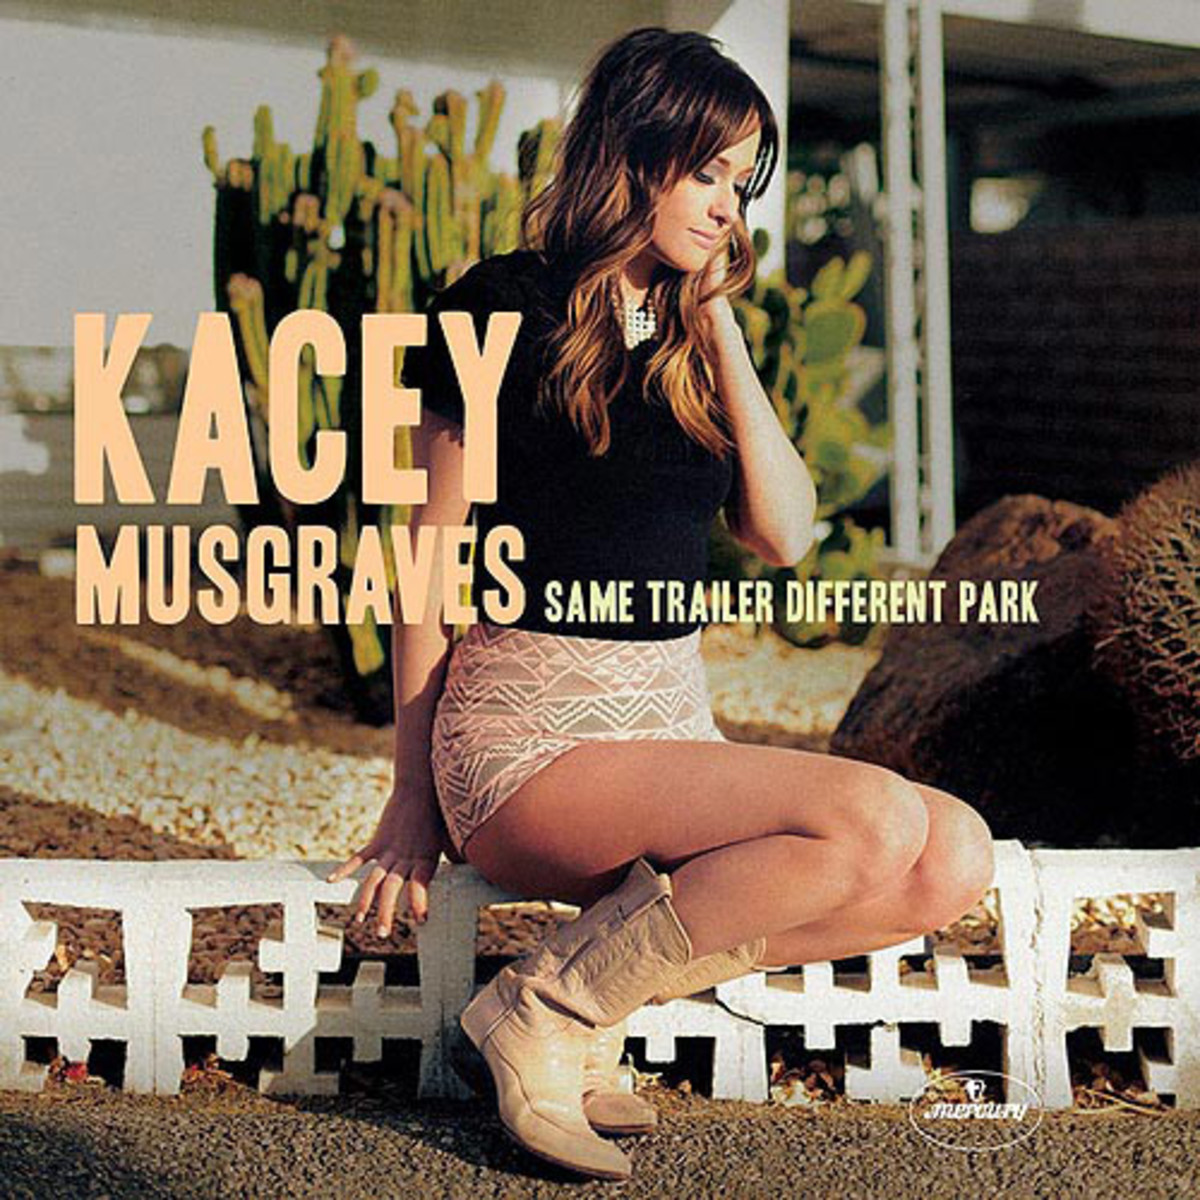 Even critically acclaimed female artists like Kacey Musgraves can't compete with bro-country